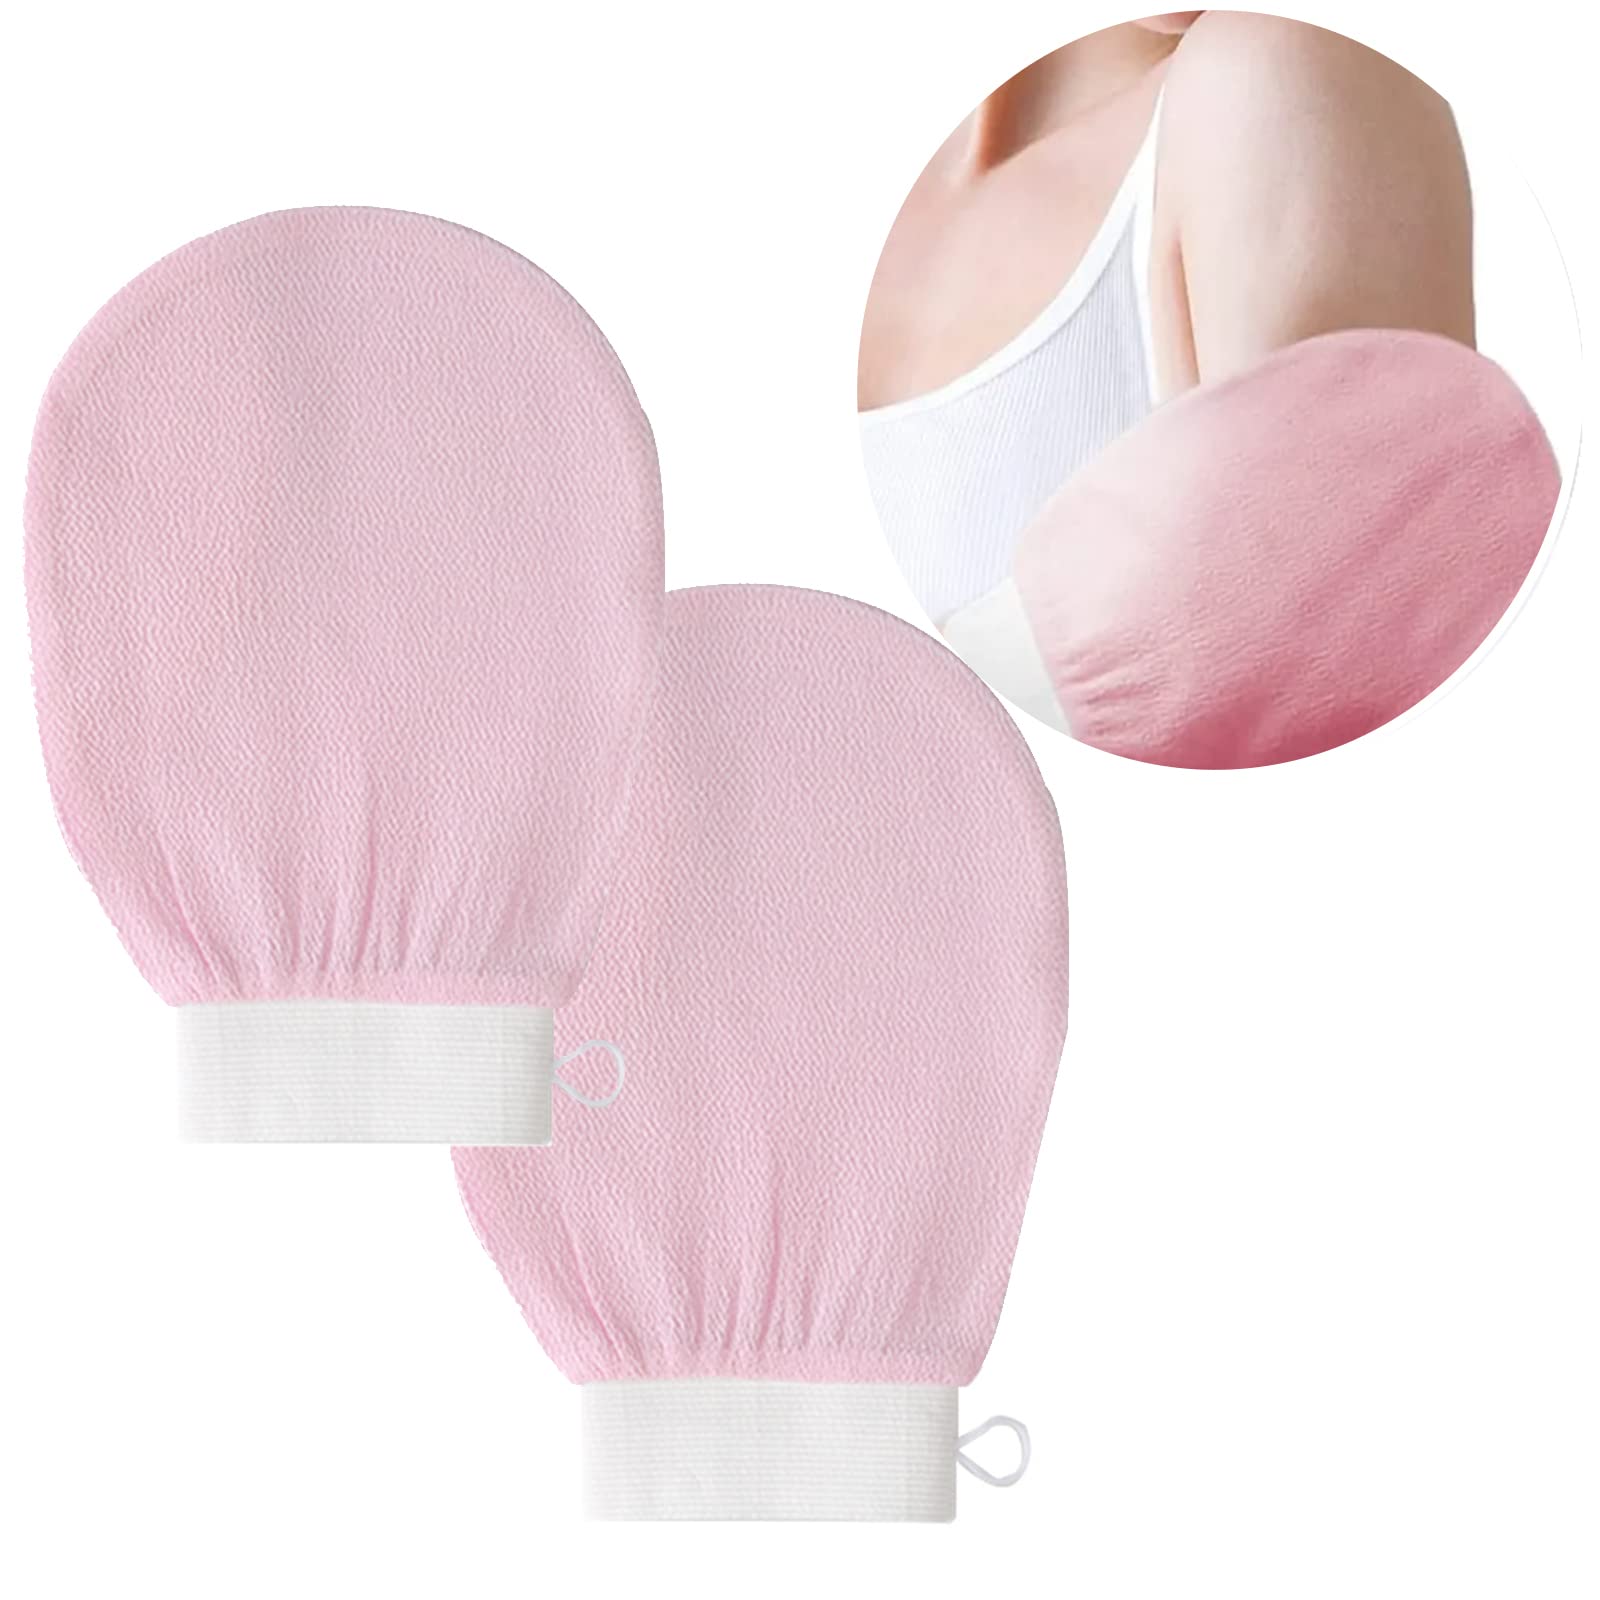 Exfoliating Glove 2pcs - Pink - Removes Unwanted Dead Skin, Exfoliating Gloves for Bath or Shower,Exfoliating Mitts at Home,Made of 100% Viscose Fibe